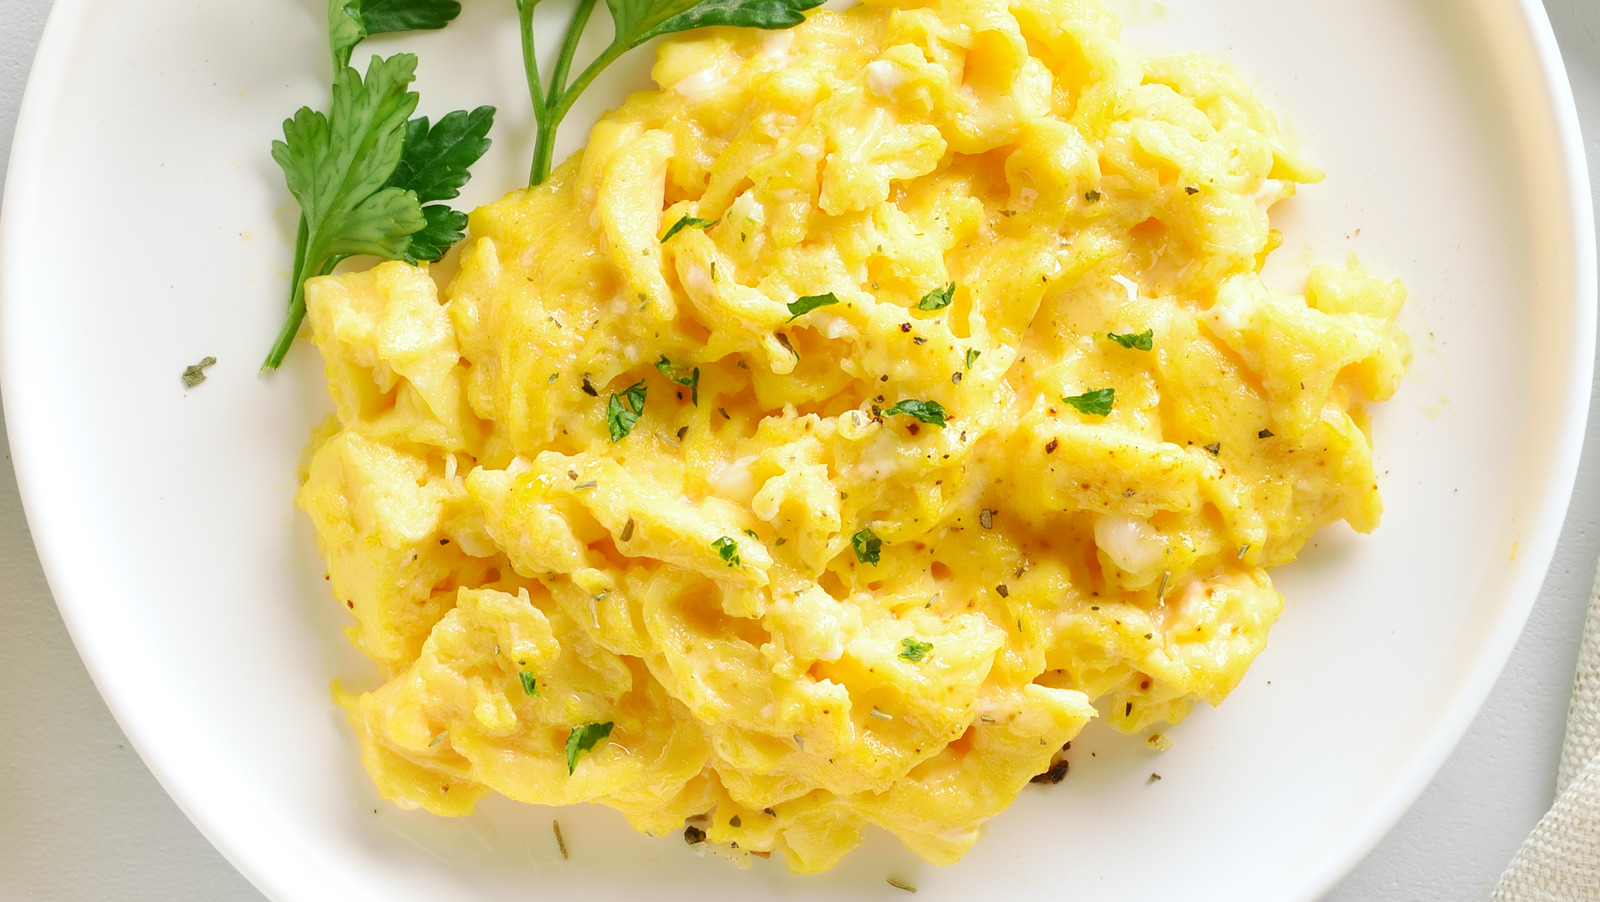 https://www.mashed.com/img/gallery/the-unexpected-ingredient-alton-brown-puts-in-his-scrambled-eggs/l-intro-1652223250.jpg